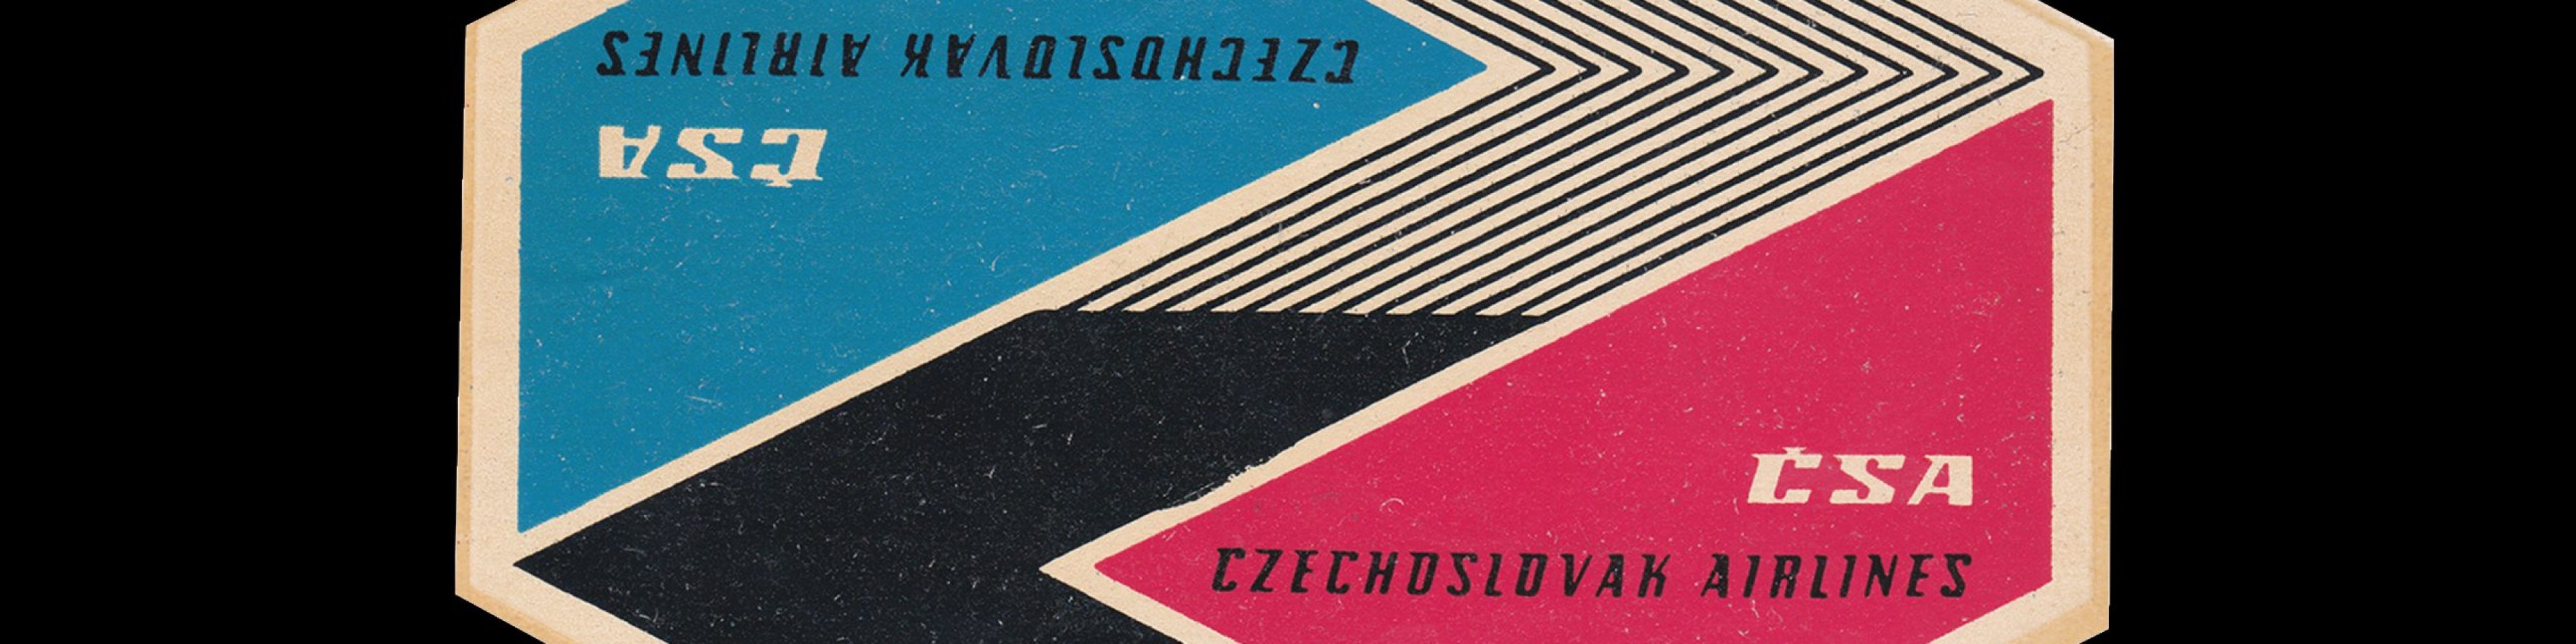 CSA Czechoslovak Airlines Luggage Label